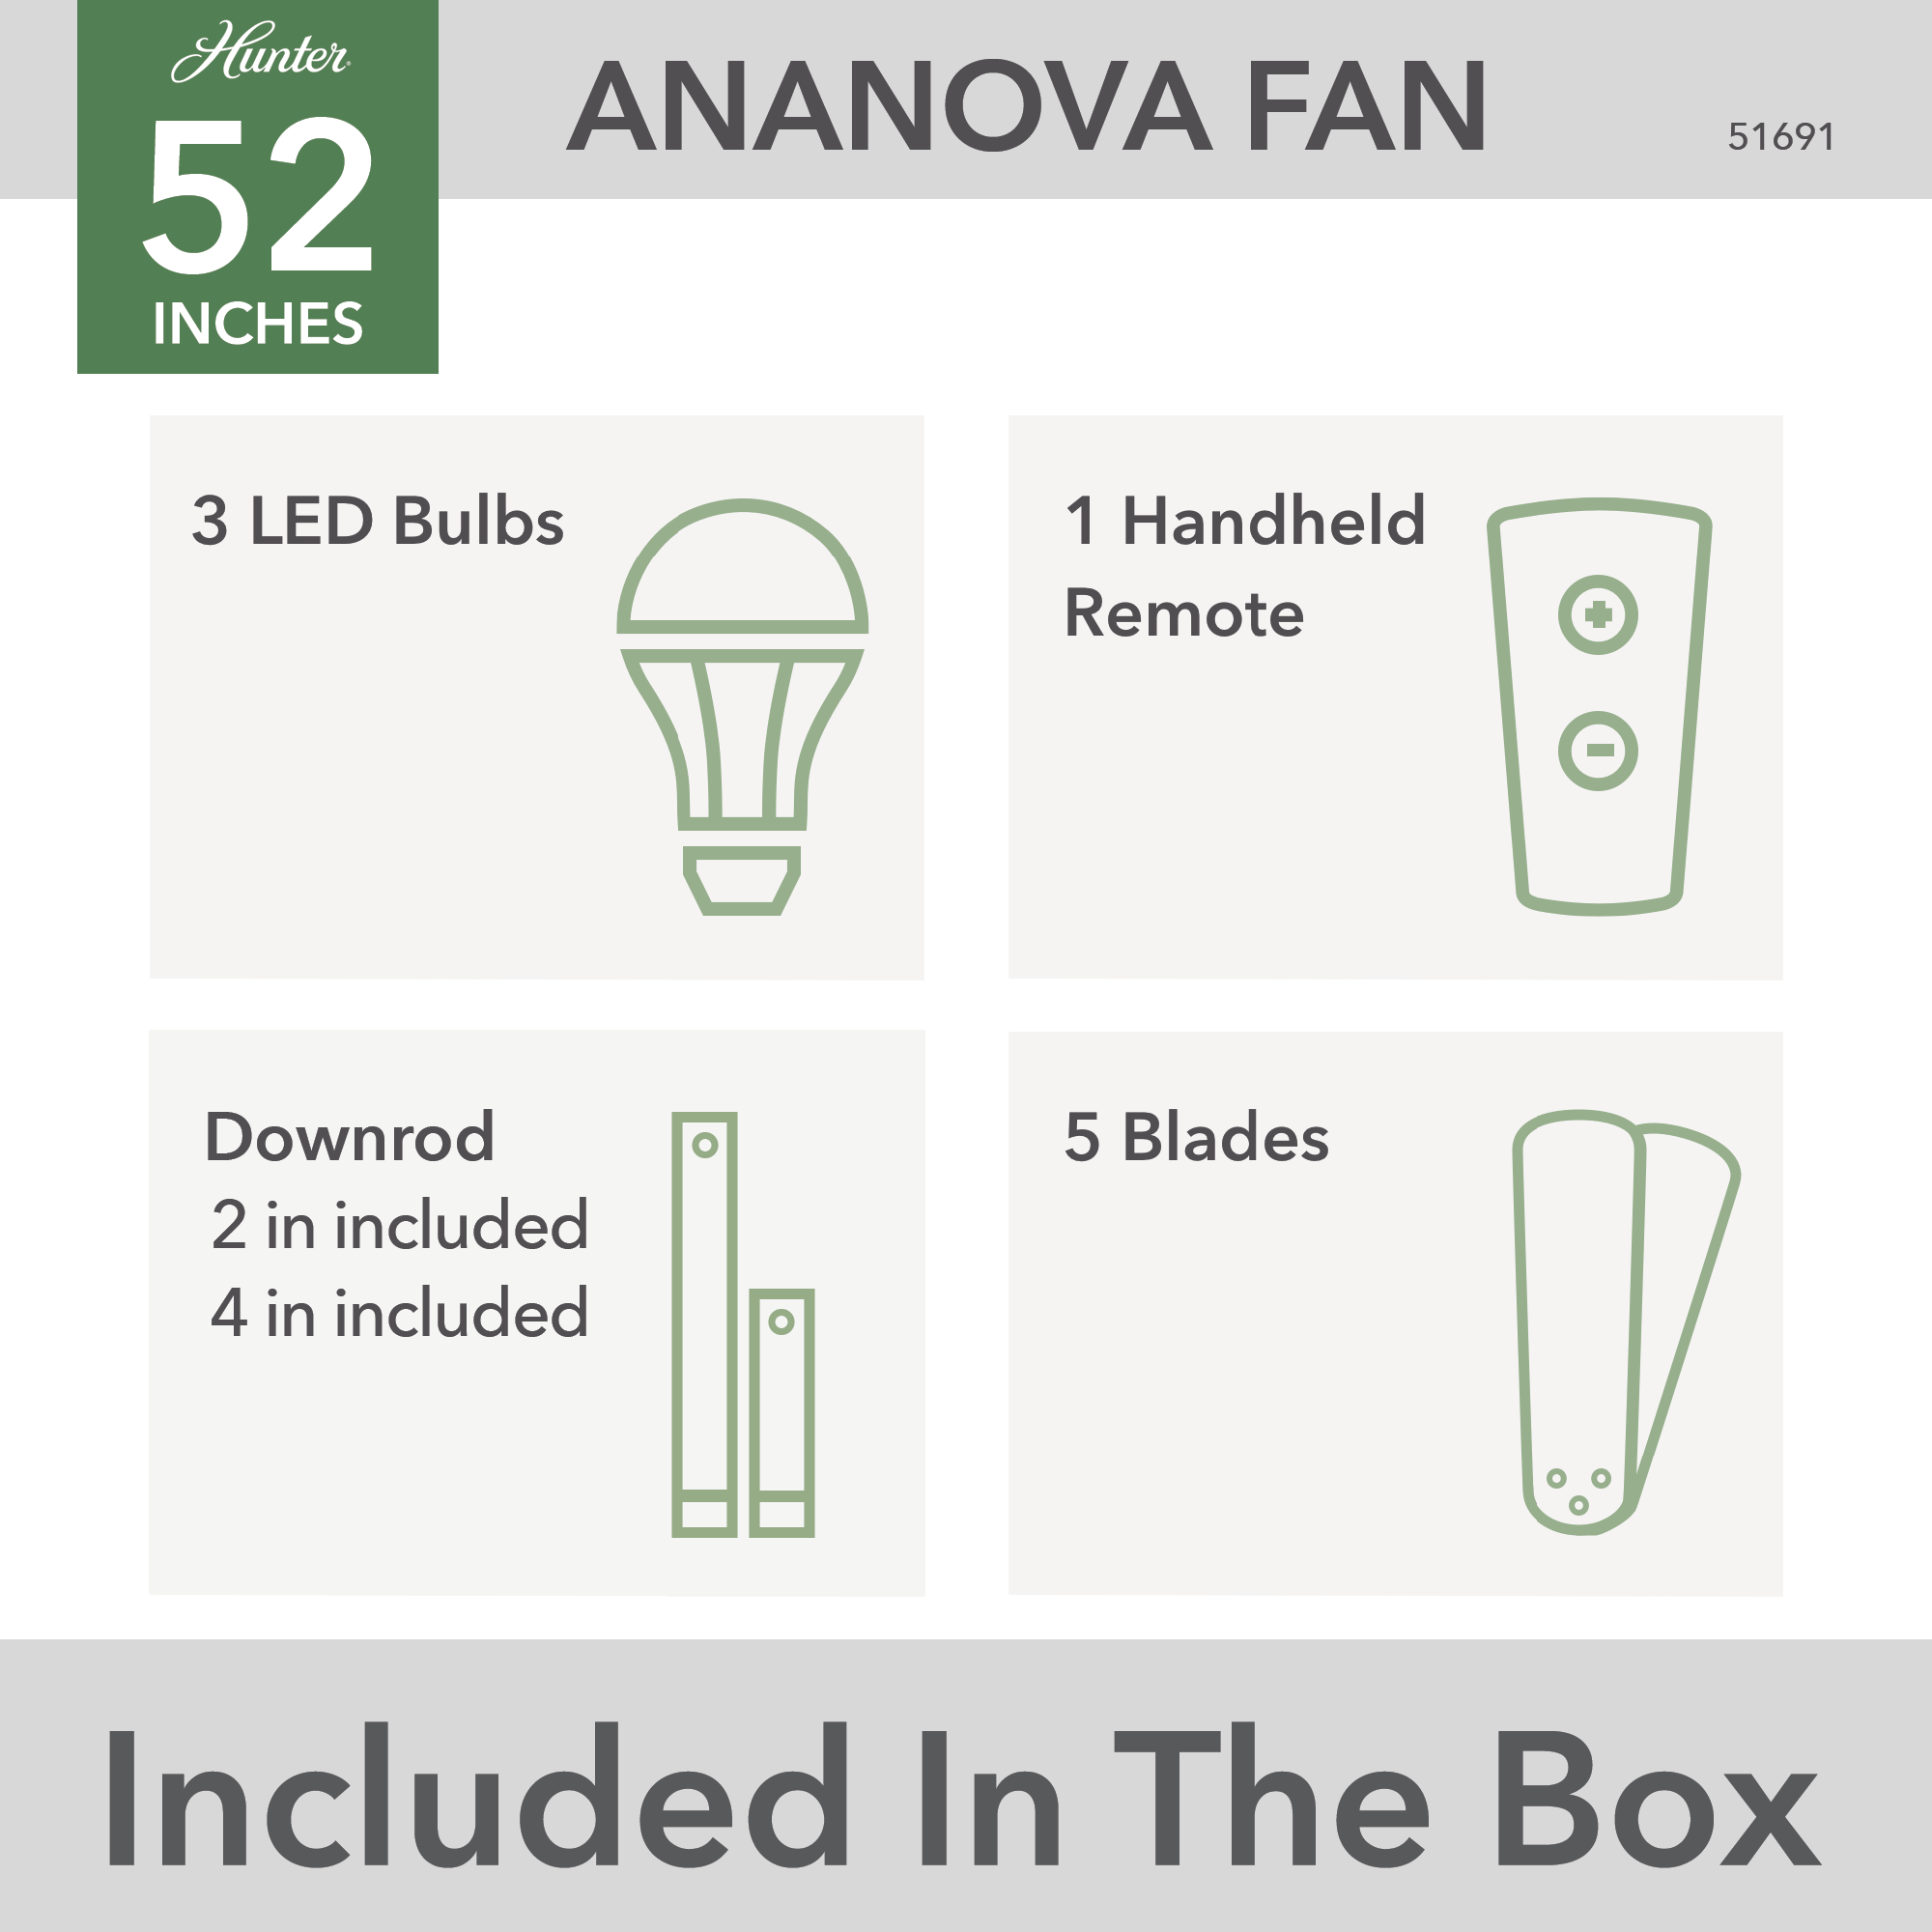 Hunter 52 inch Wi-Fi Ananova Ceiling Fan with LED Light Kit and Handheld Remote